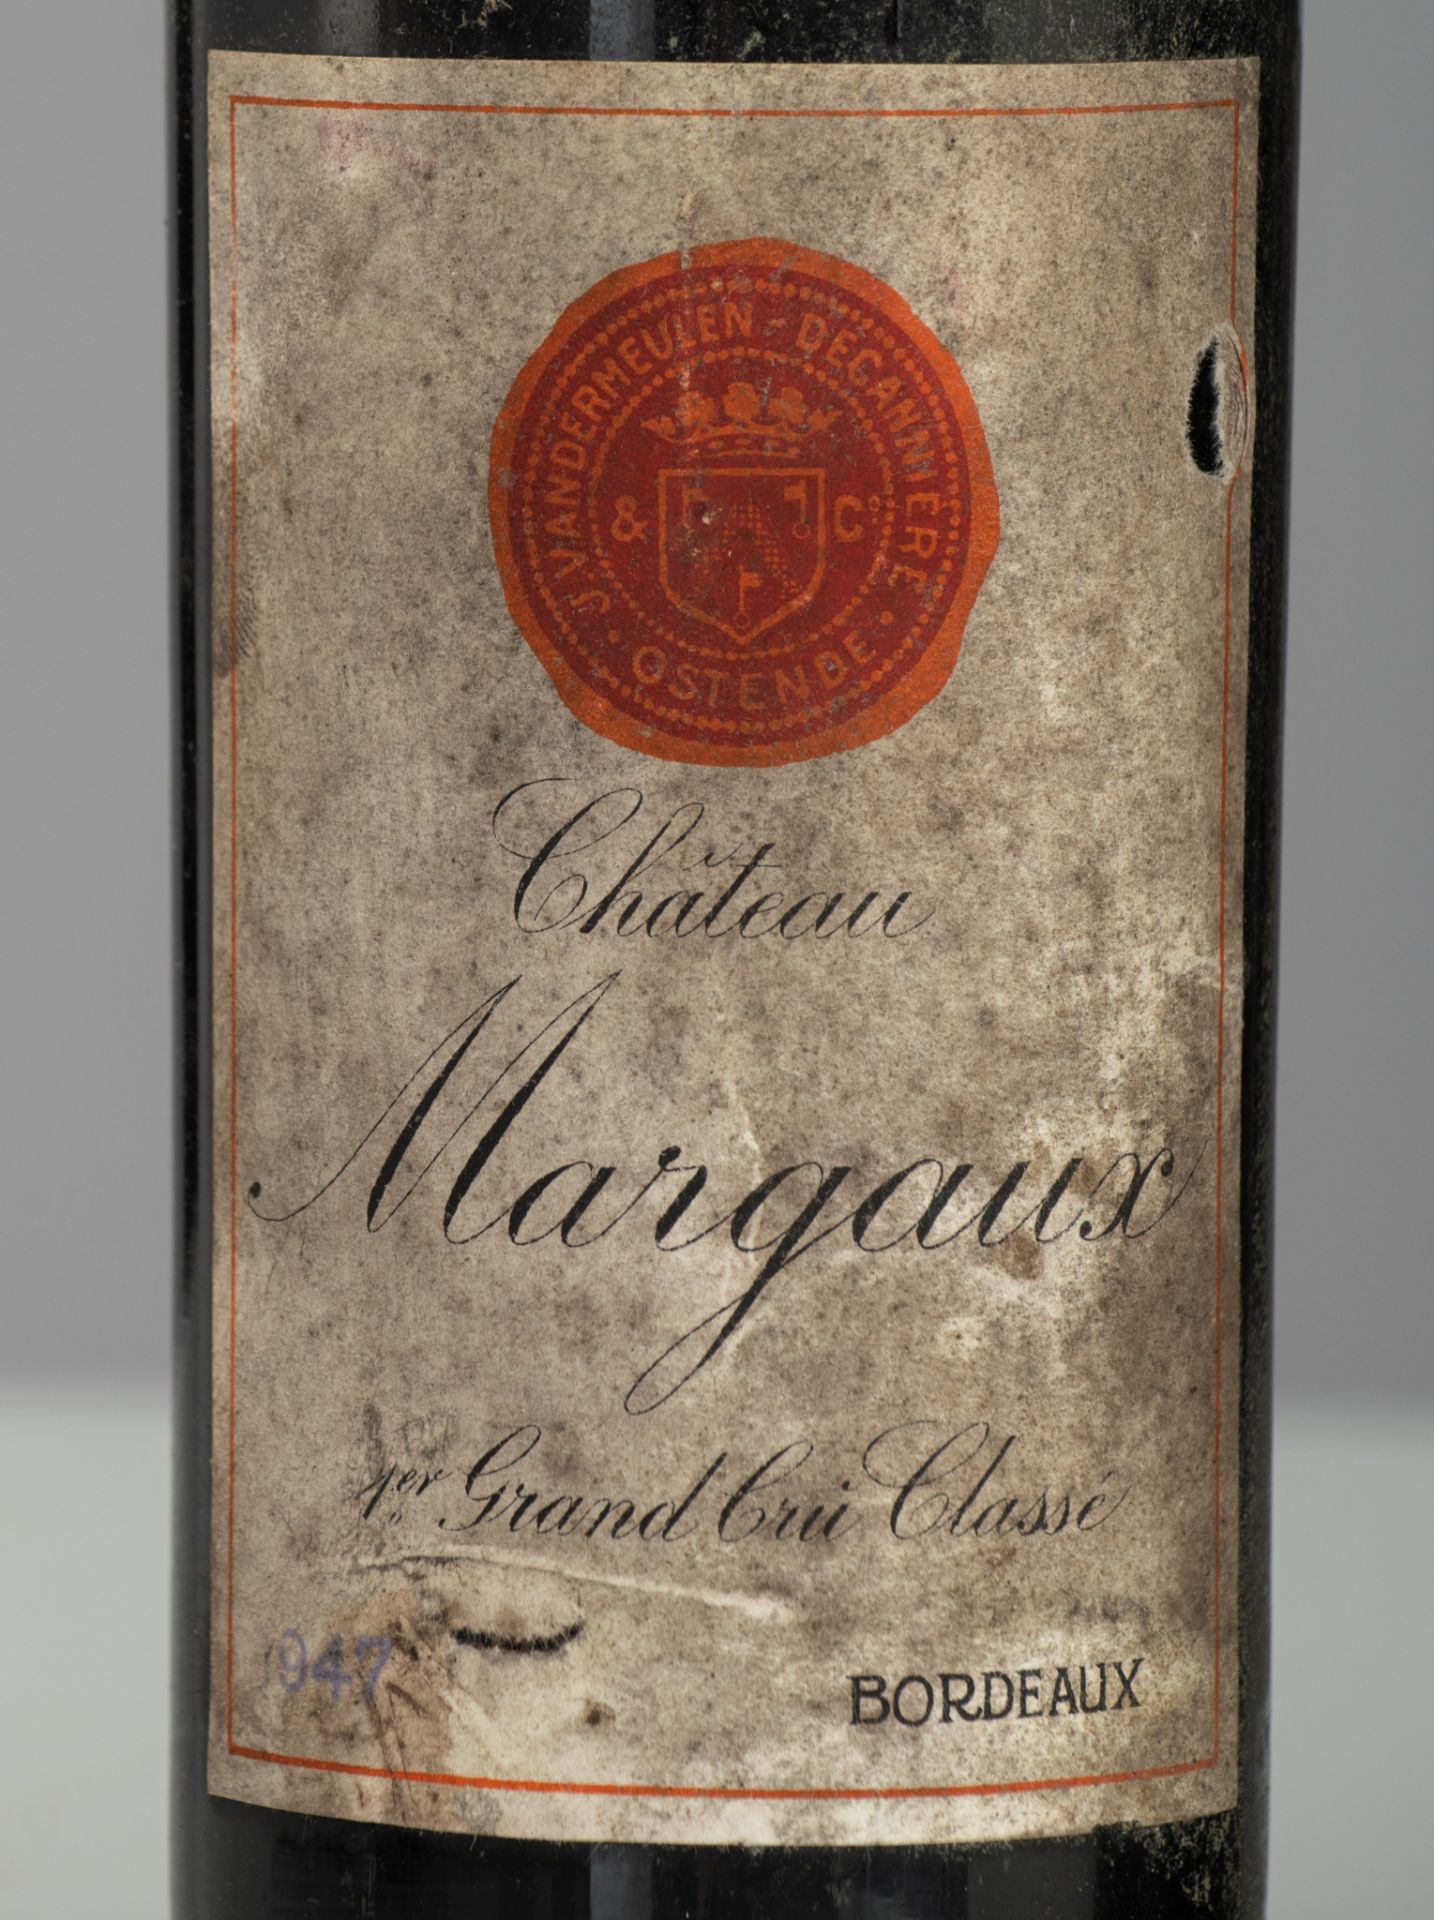 A collection of 17 bottles Ch‚teau Margaux, 1er Grand Cr˚ Classe, Bordeaux, 1947, bottled by J. Vand - Image 5 of 6